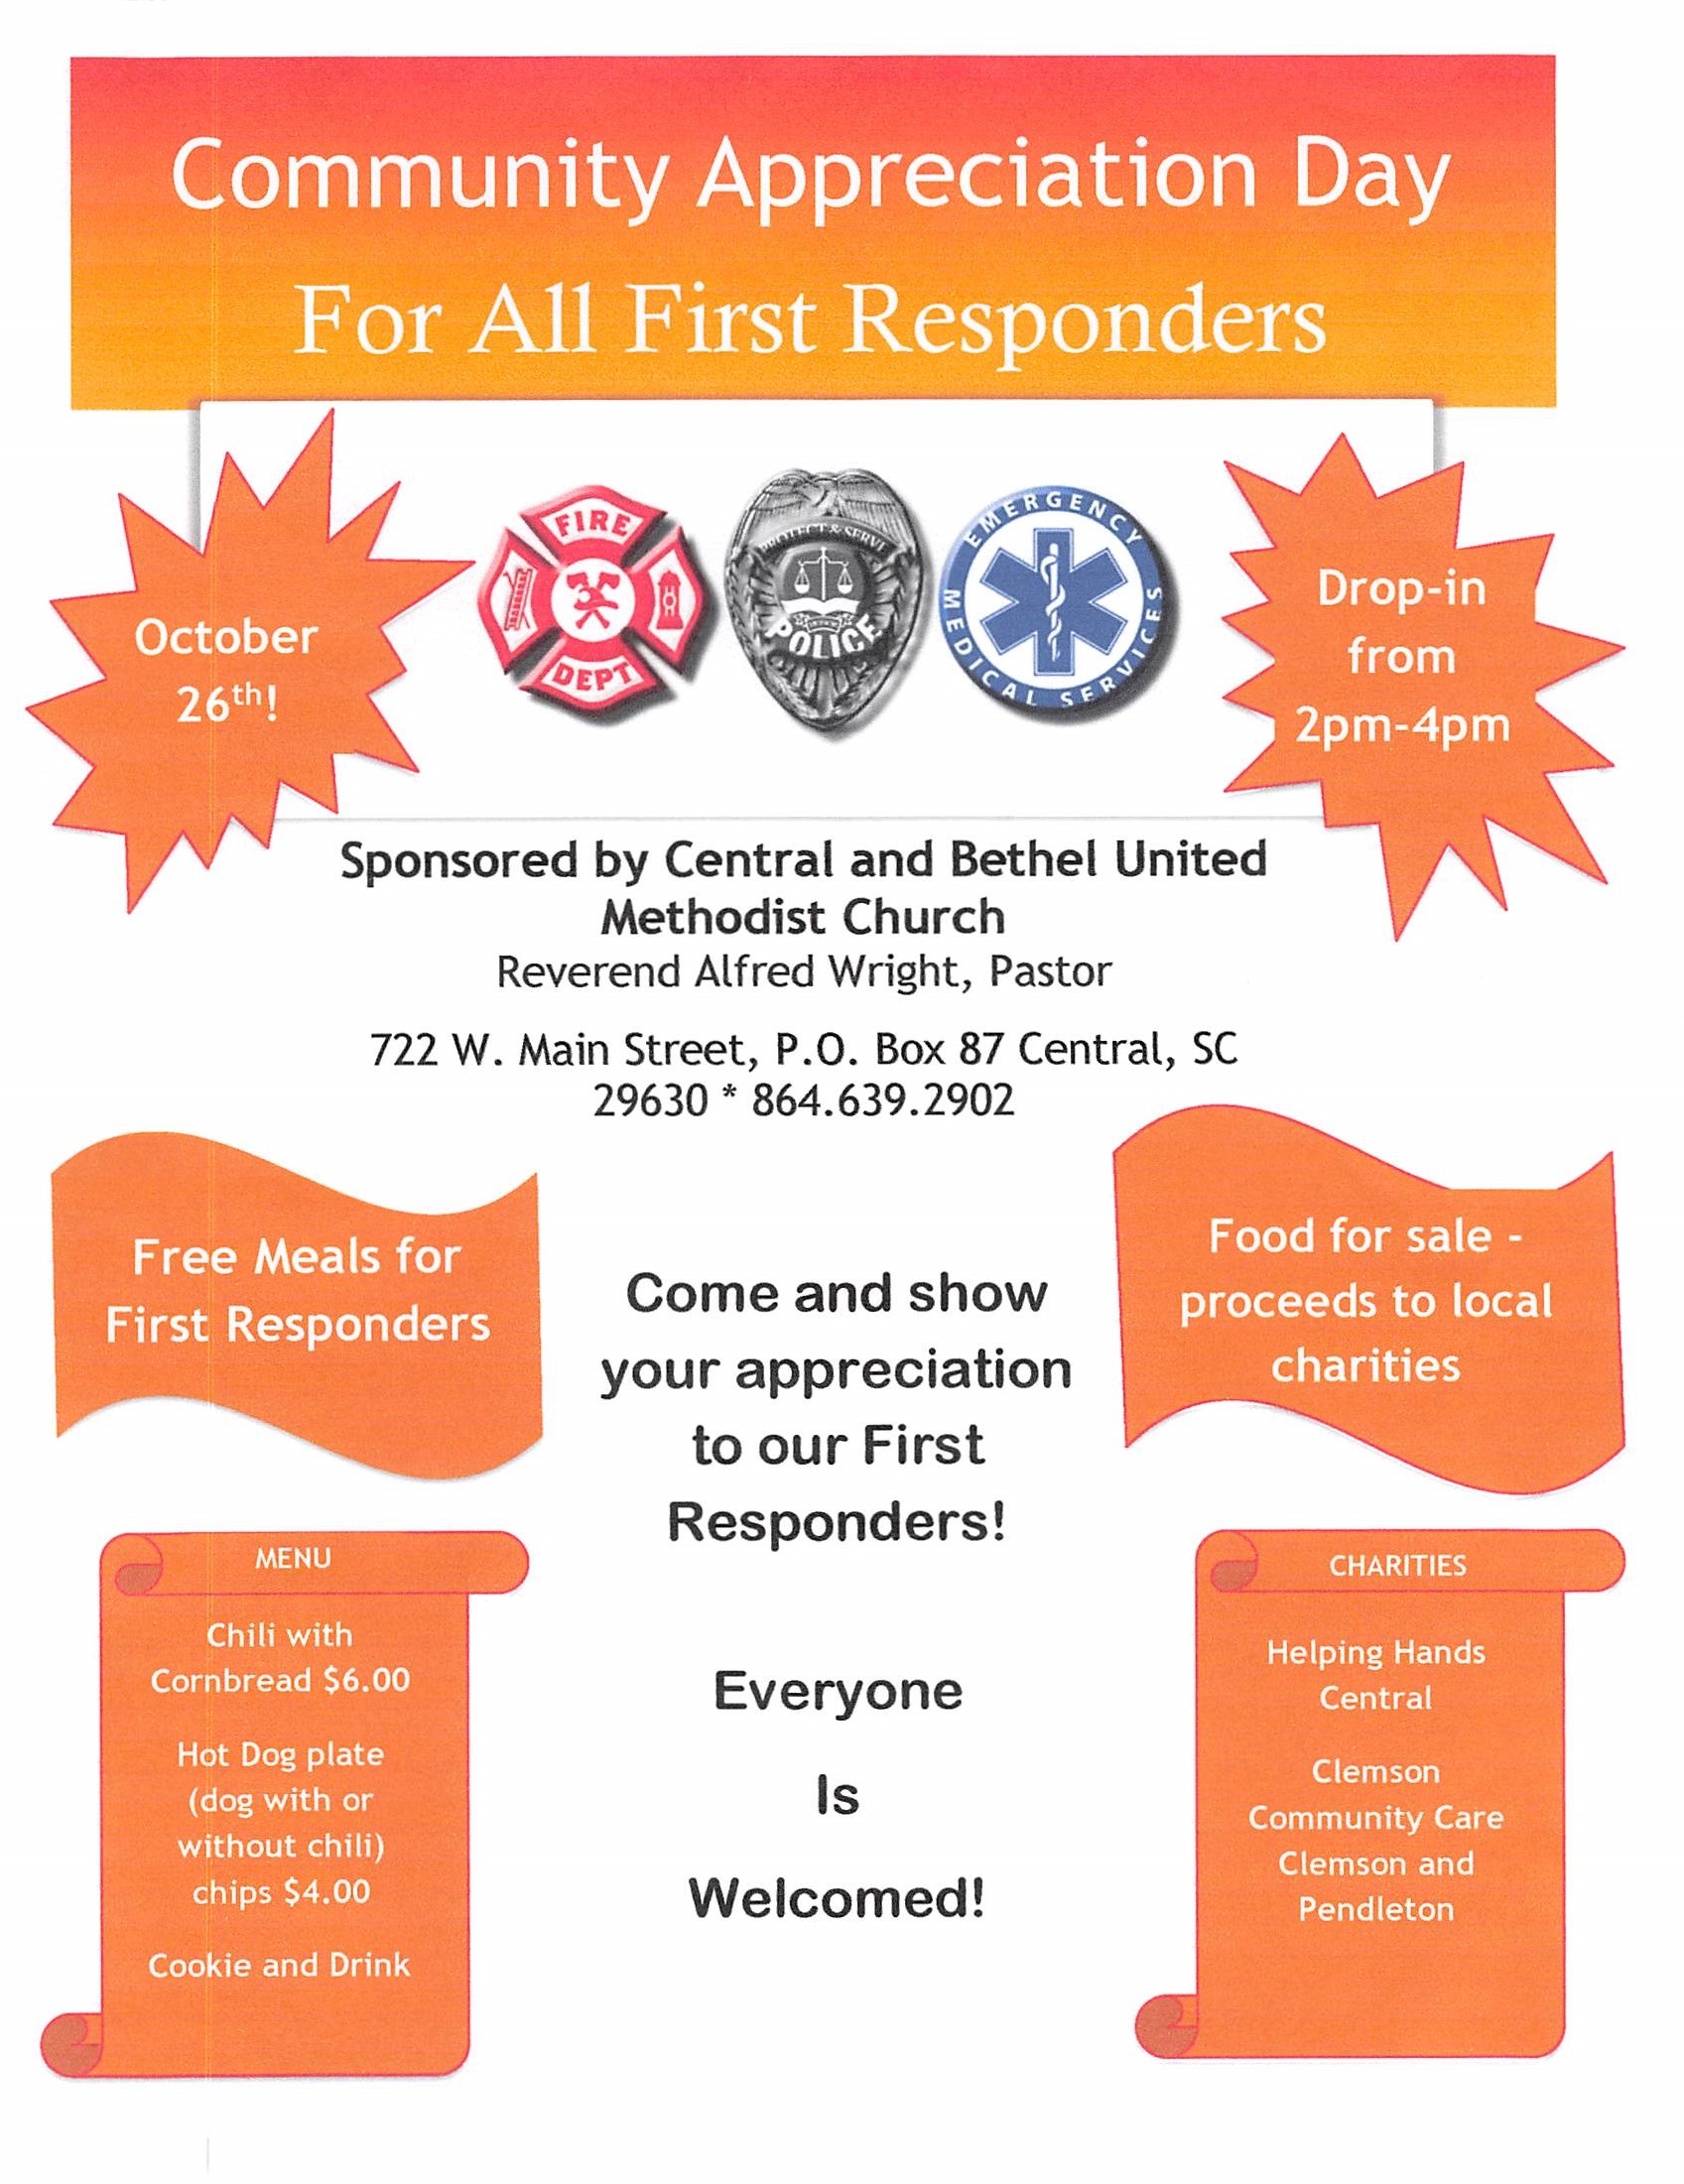 Community Appreciation for First Responders October 26th, 2019